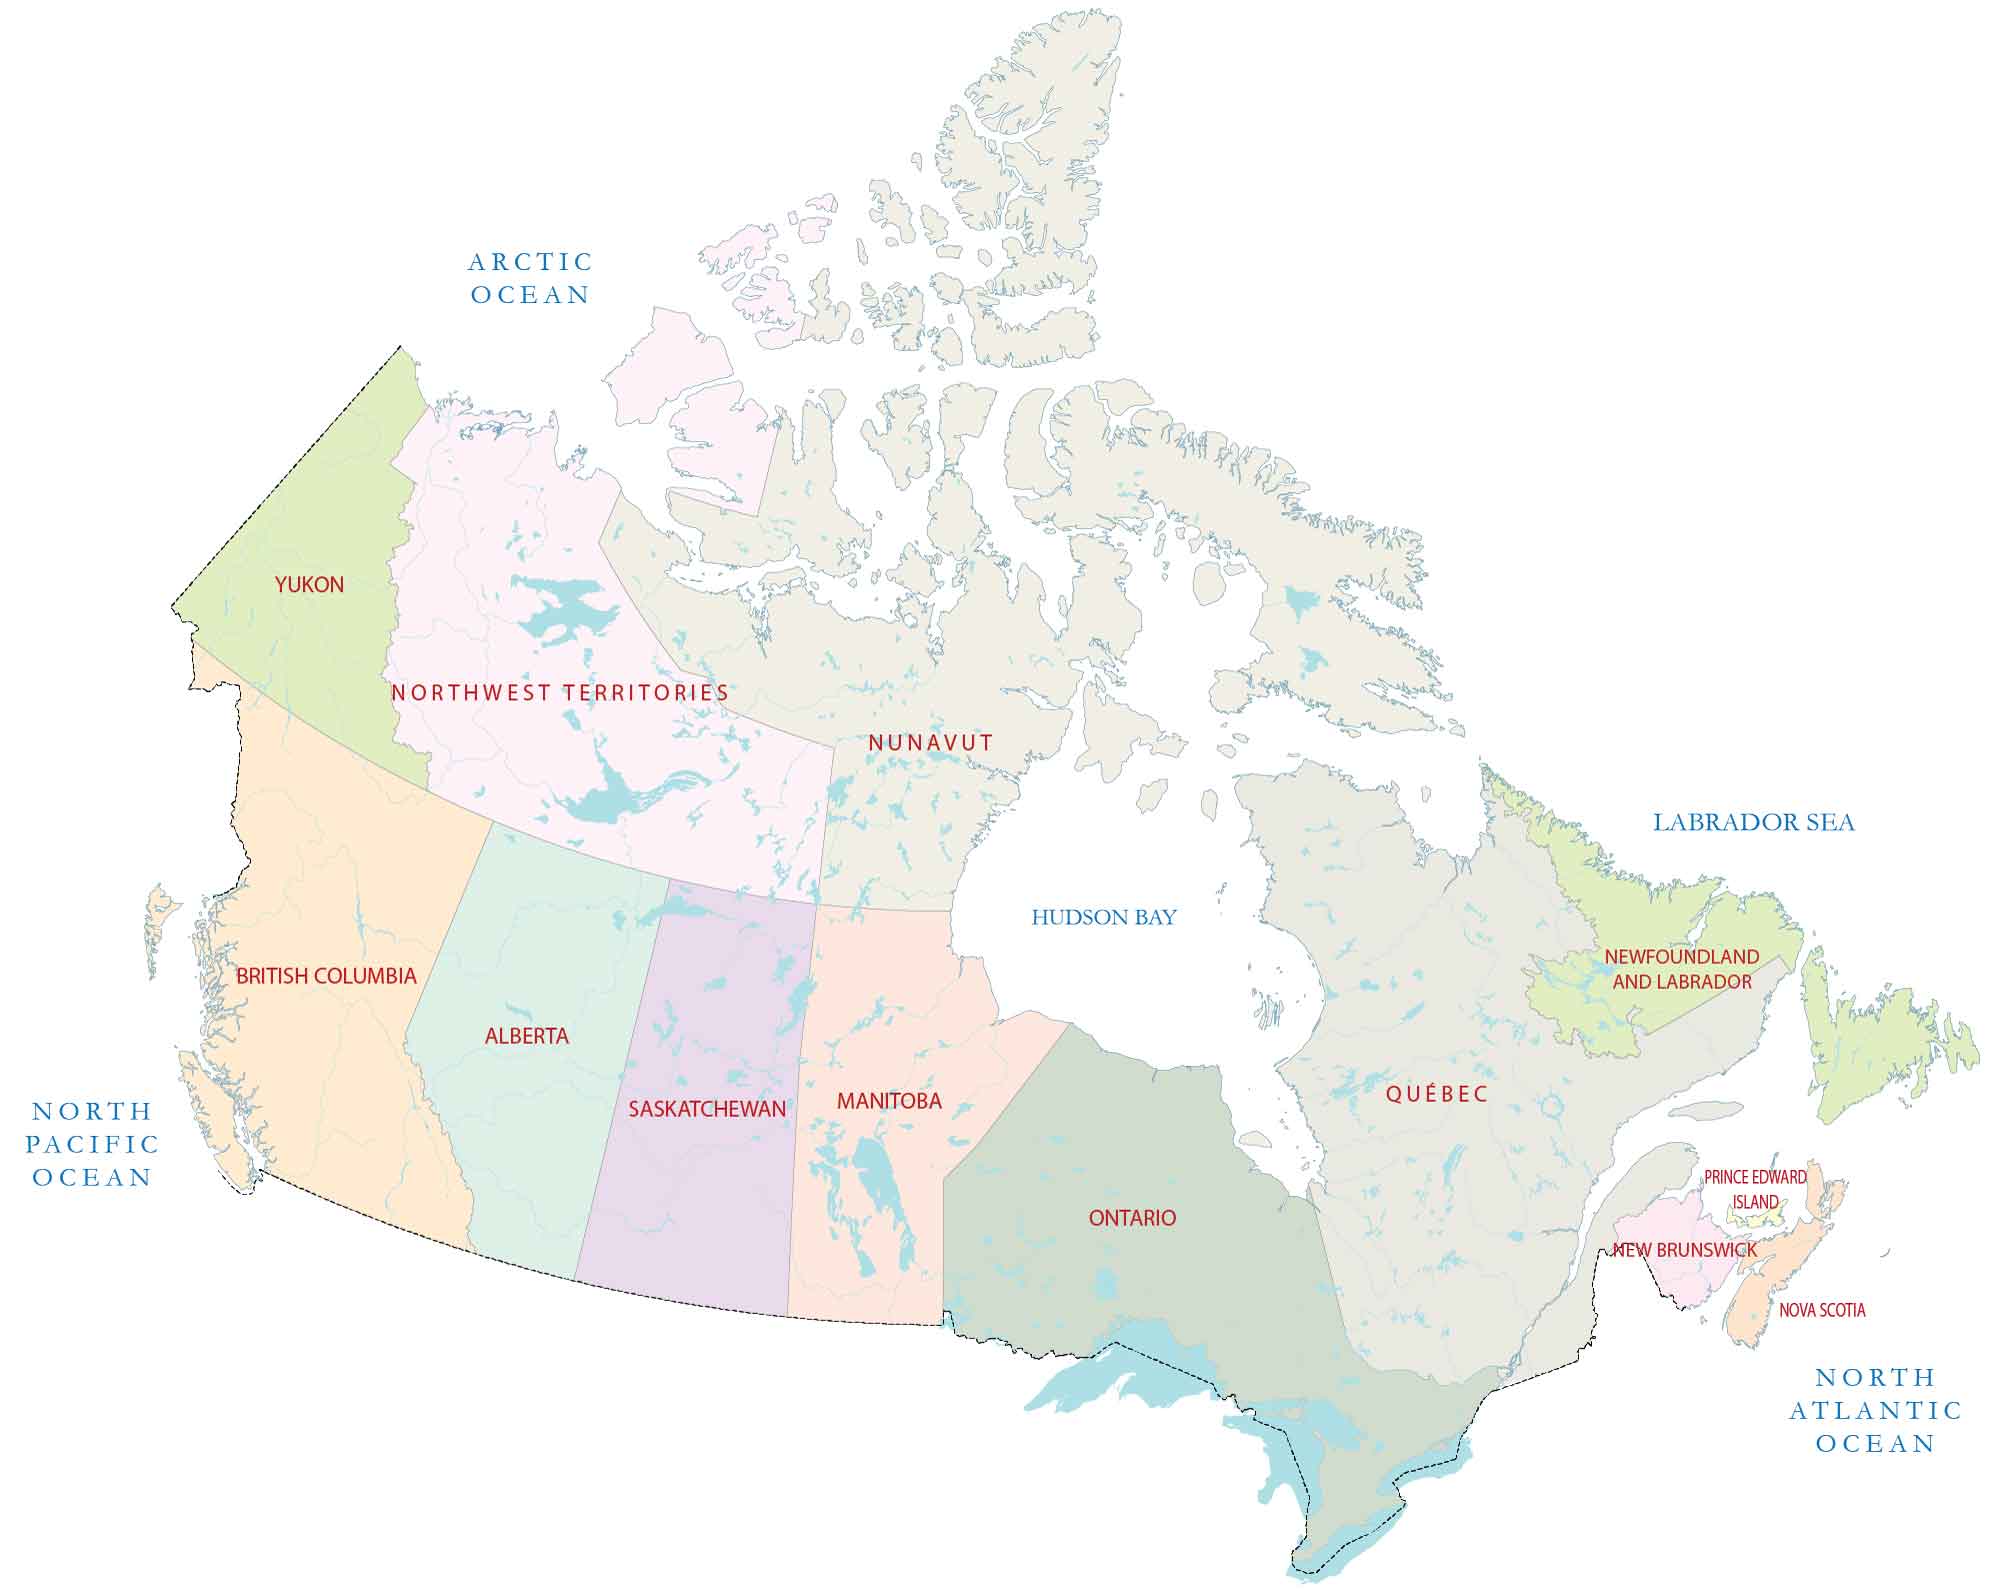 Canada Province Map